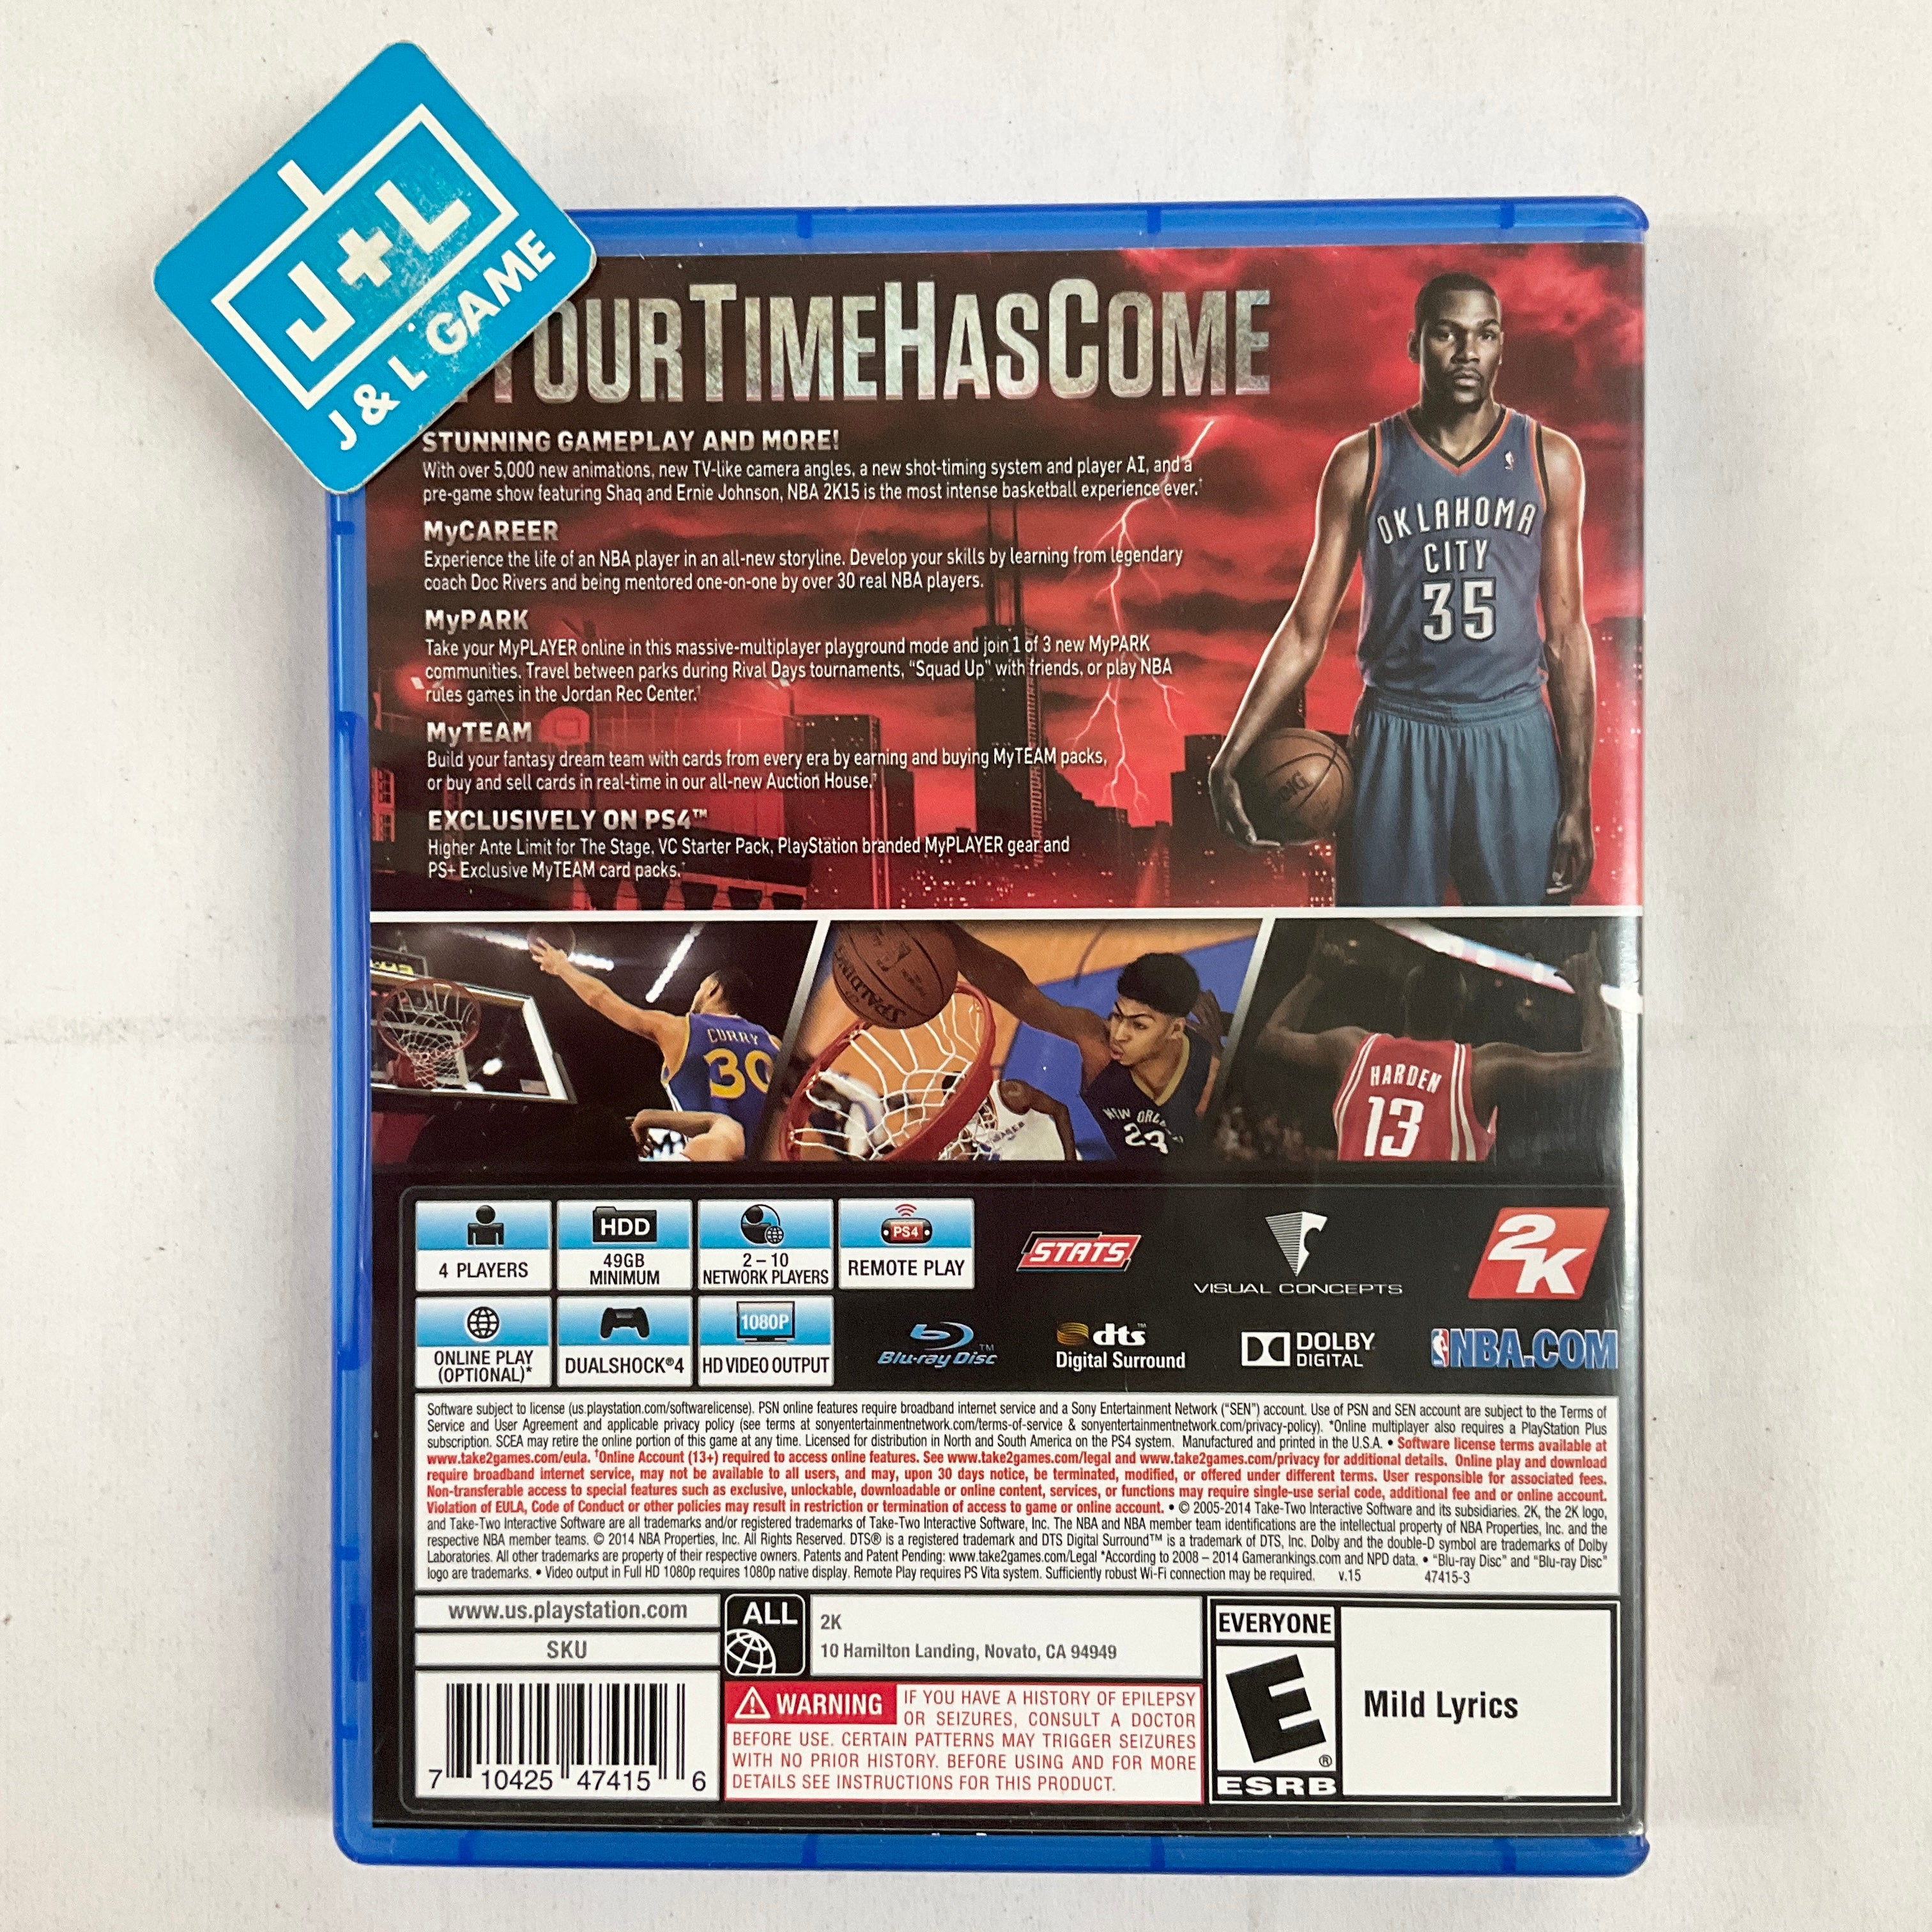 NBA 2K15 - (PS4) PlayStation 4 [Pre-Owned] Video Games 2K   